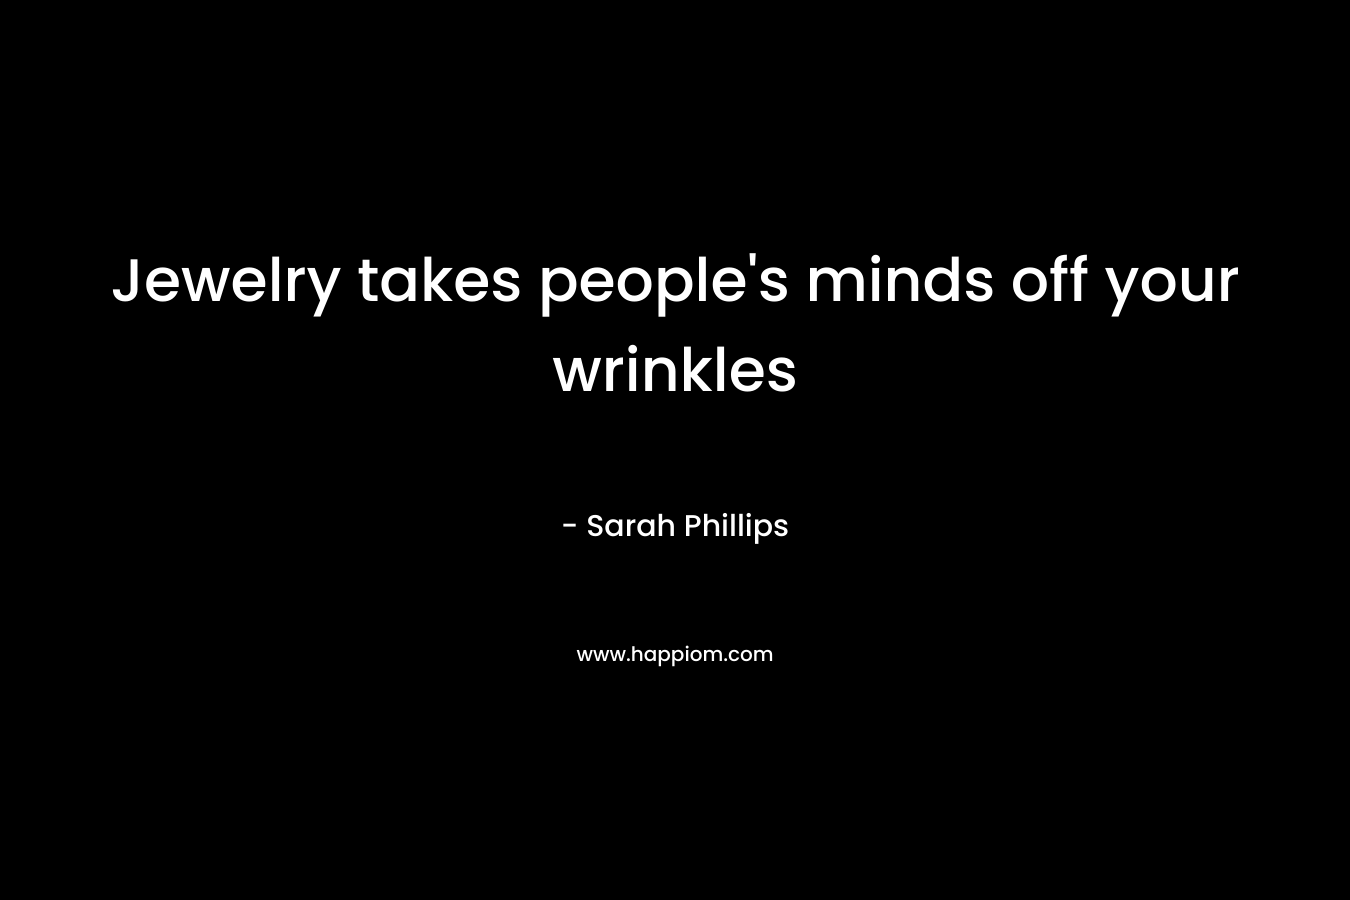 Jewelry takes people’s minds off your wrinkles – Sarah Phillips